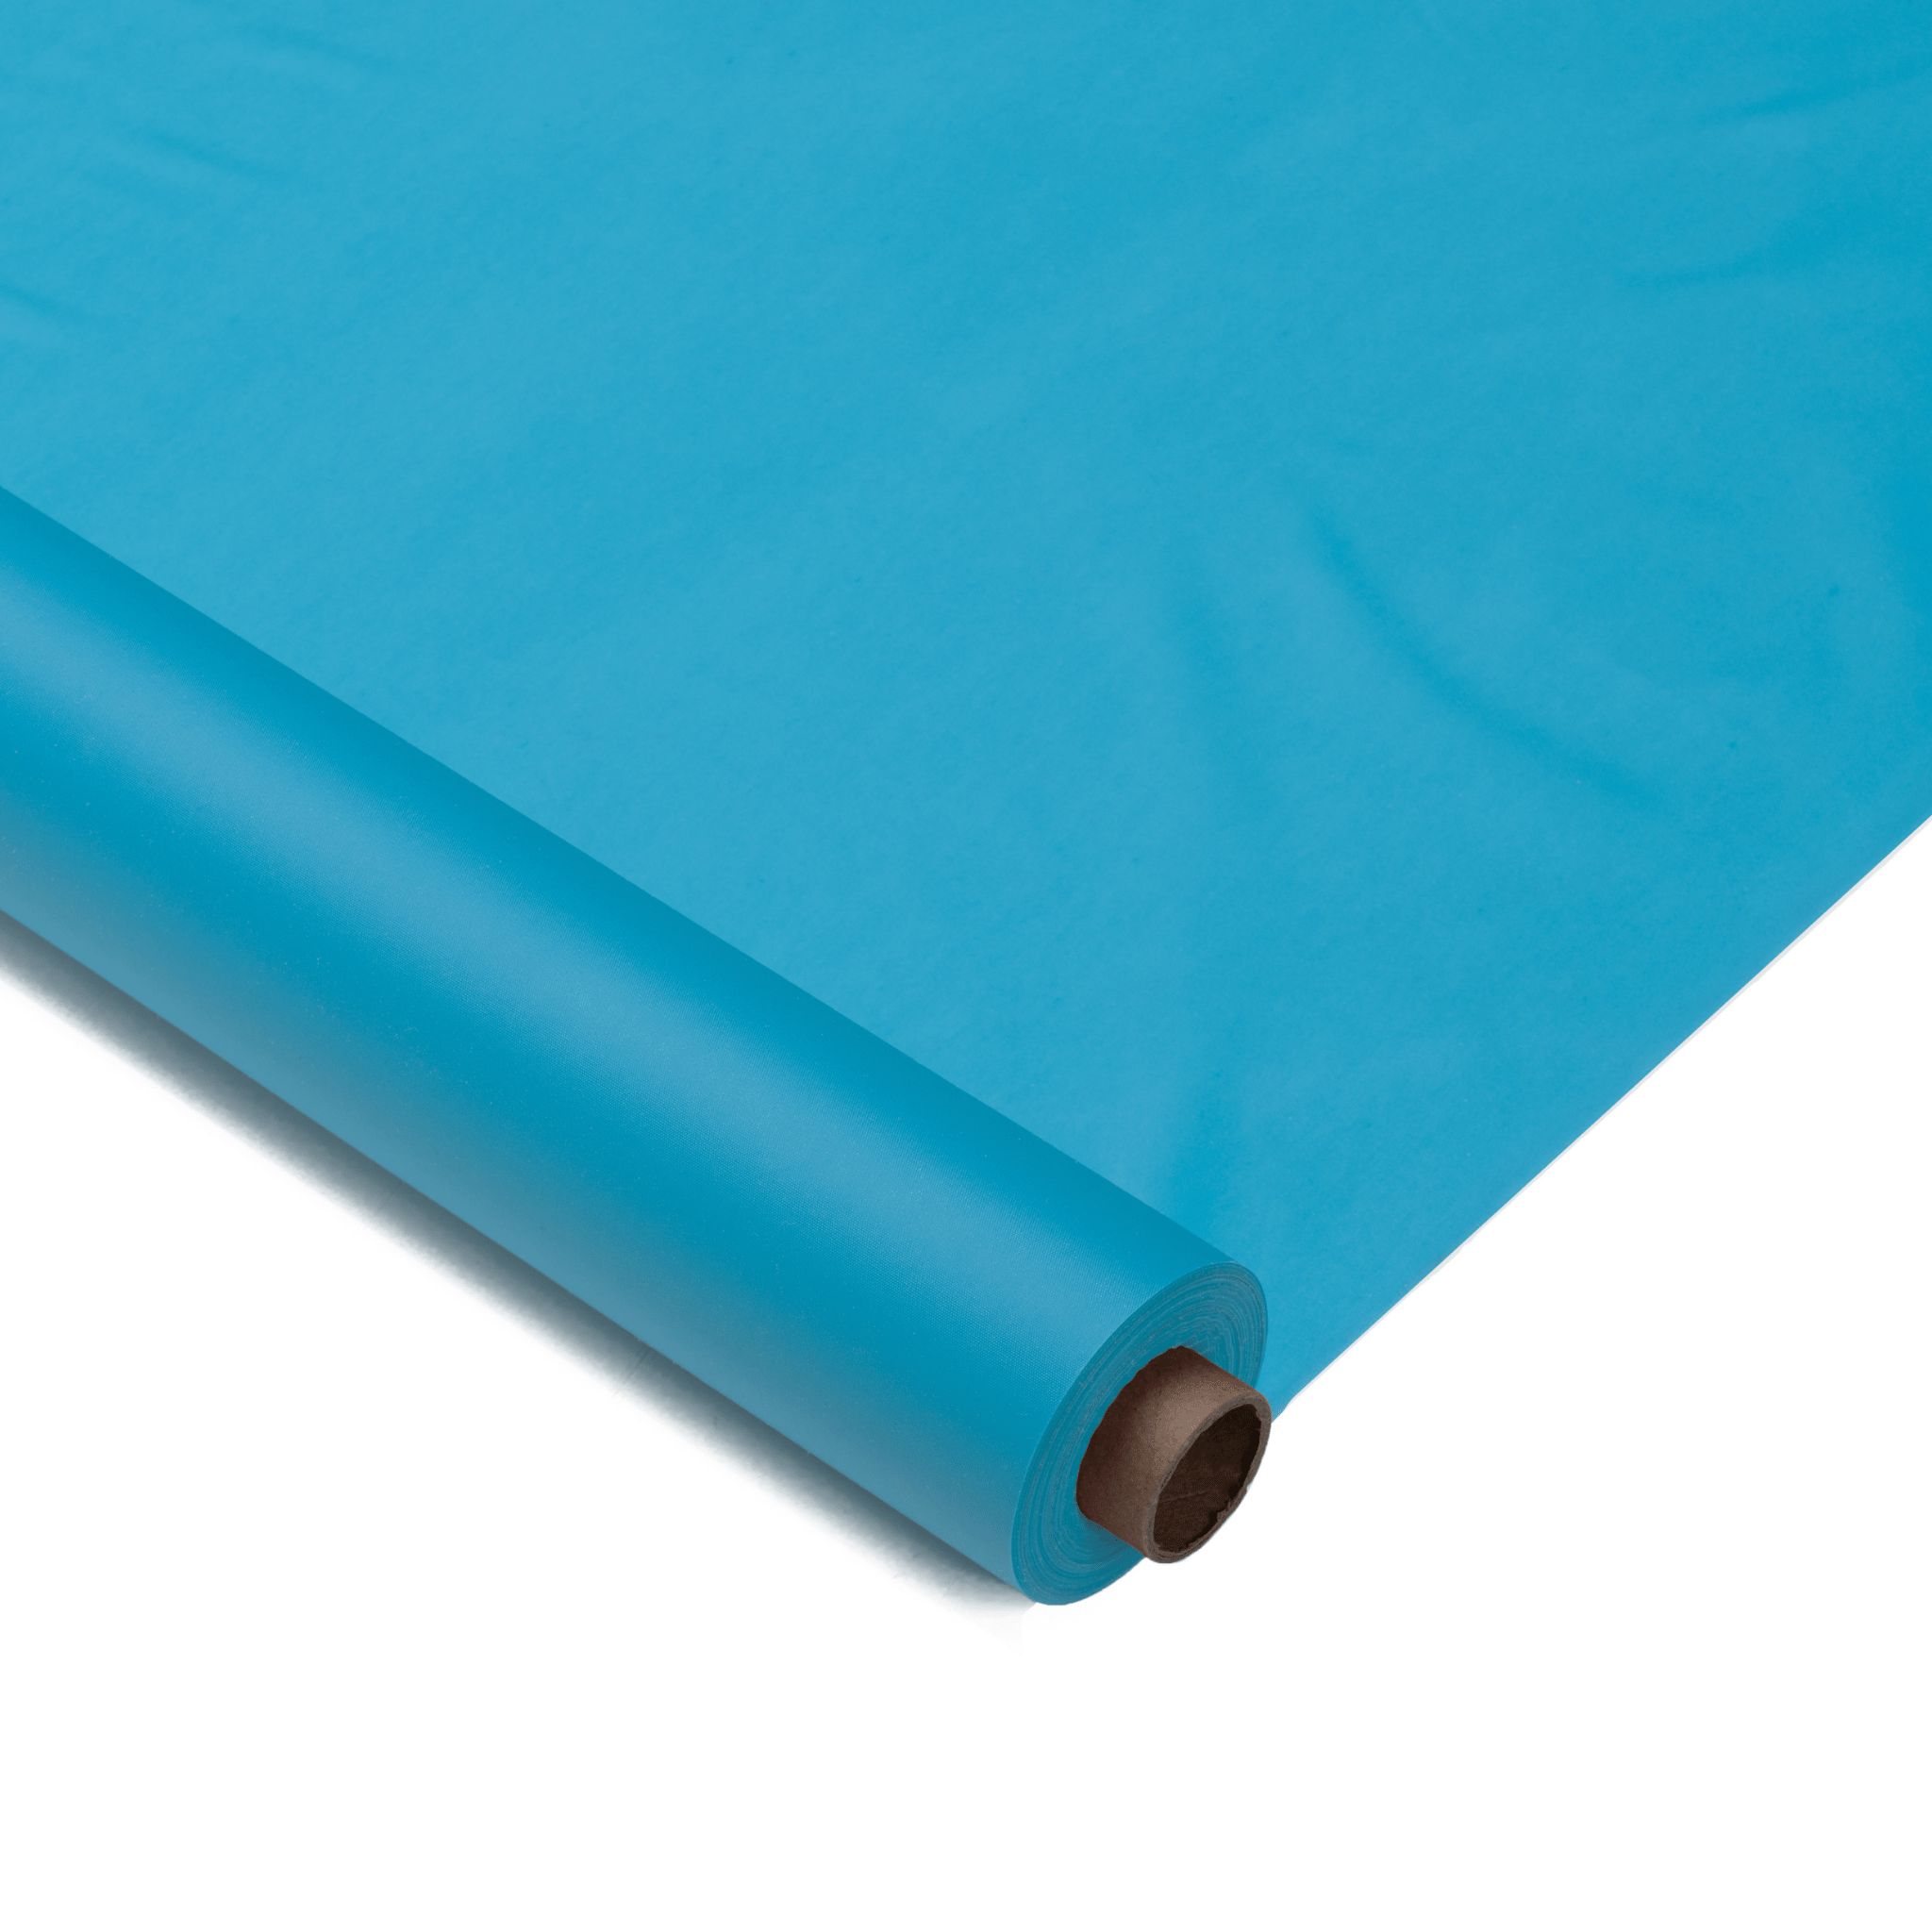 40 In. X 100 Ft. Premium Turquoise Plastic Table Roll | 6 Pack